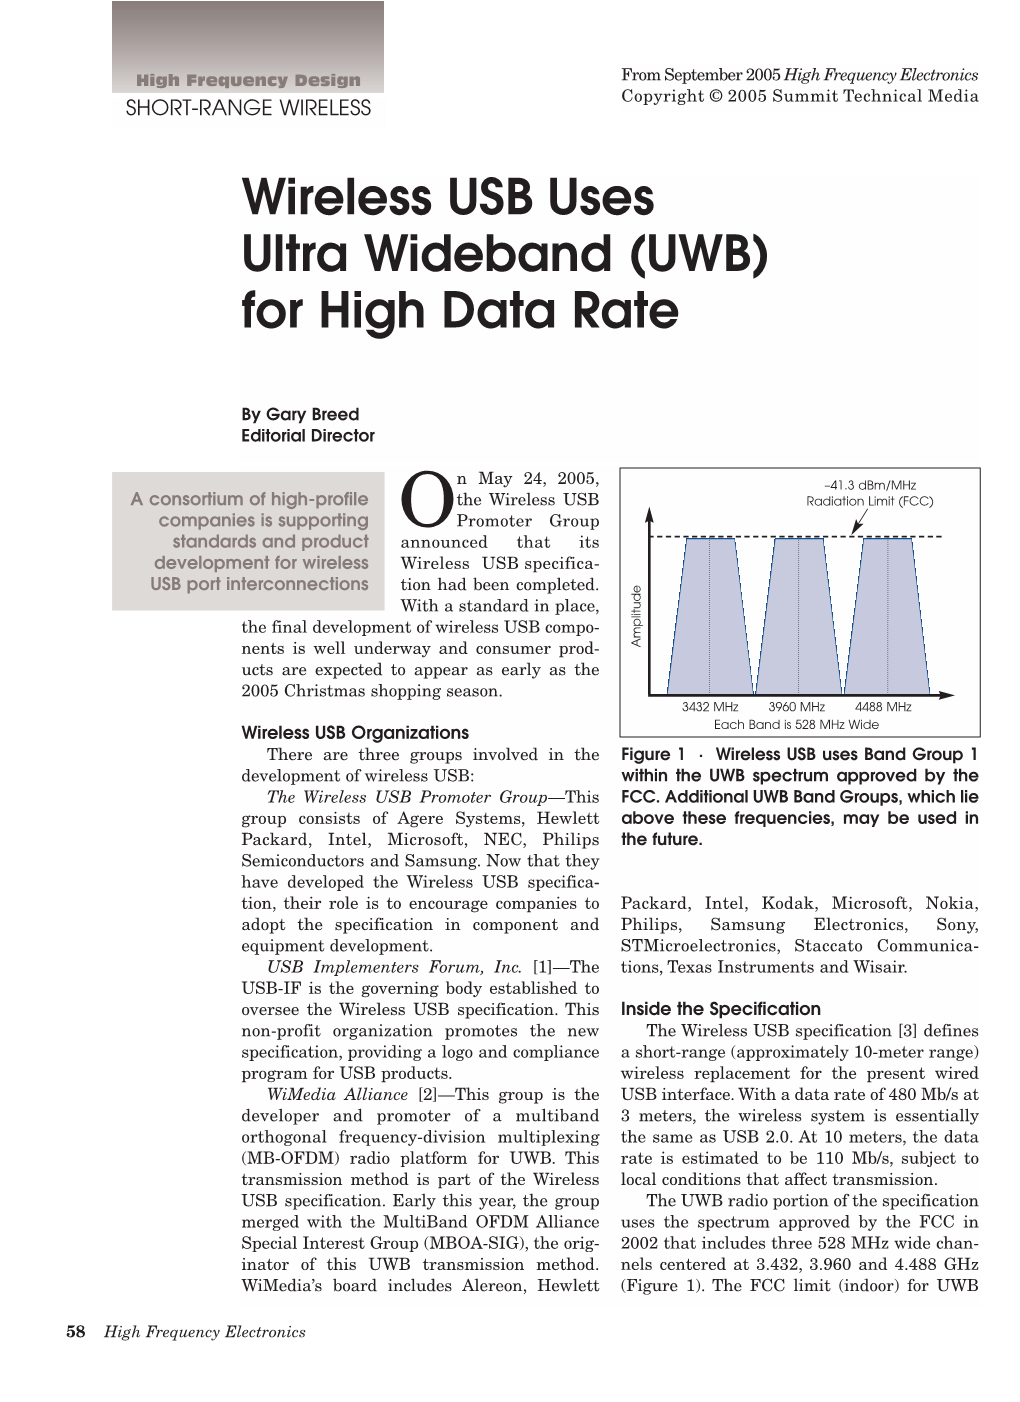 Wireless USB Uses Ultra Wideband (UWB) for High Data Rate